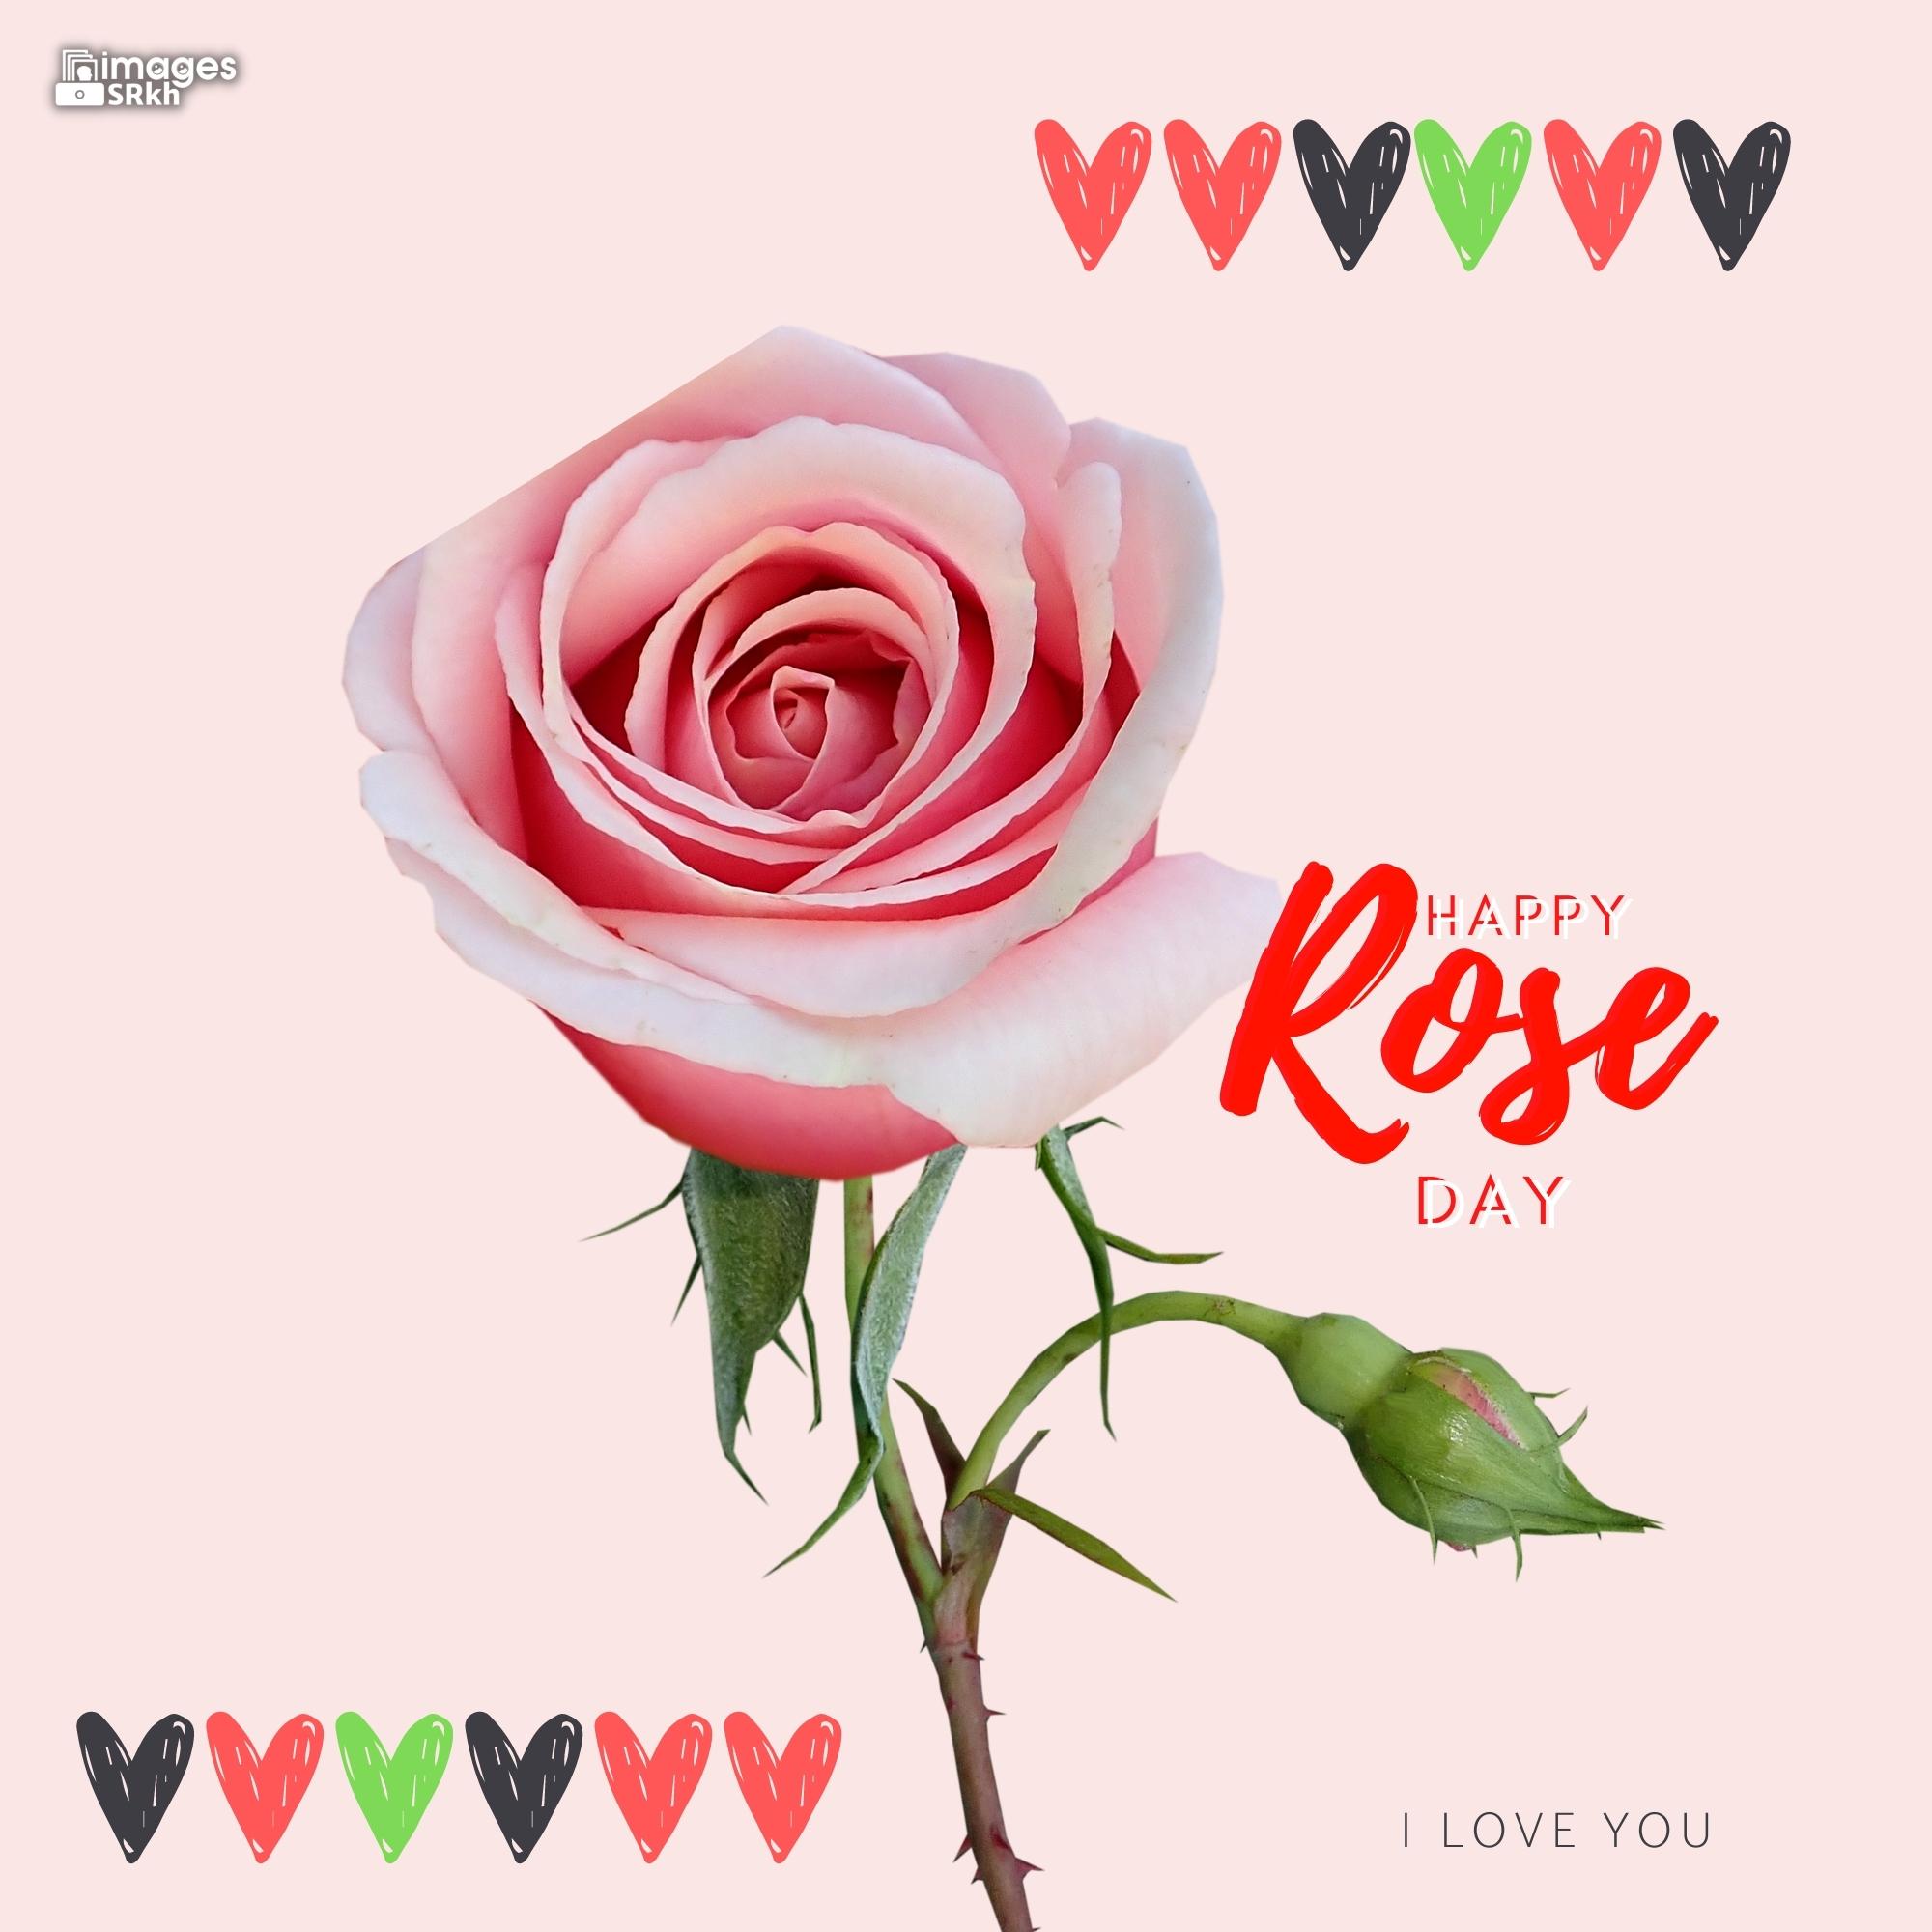 Happy Rose Day Image Hd Download (92)